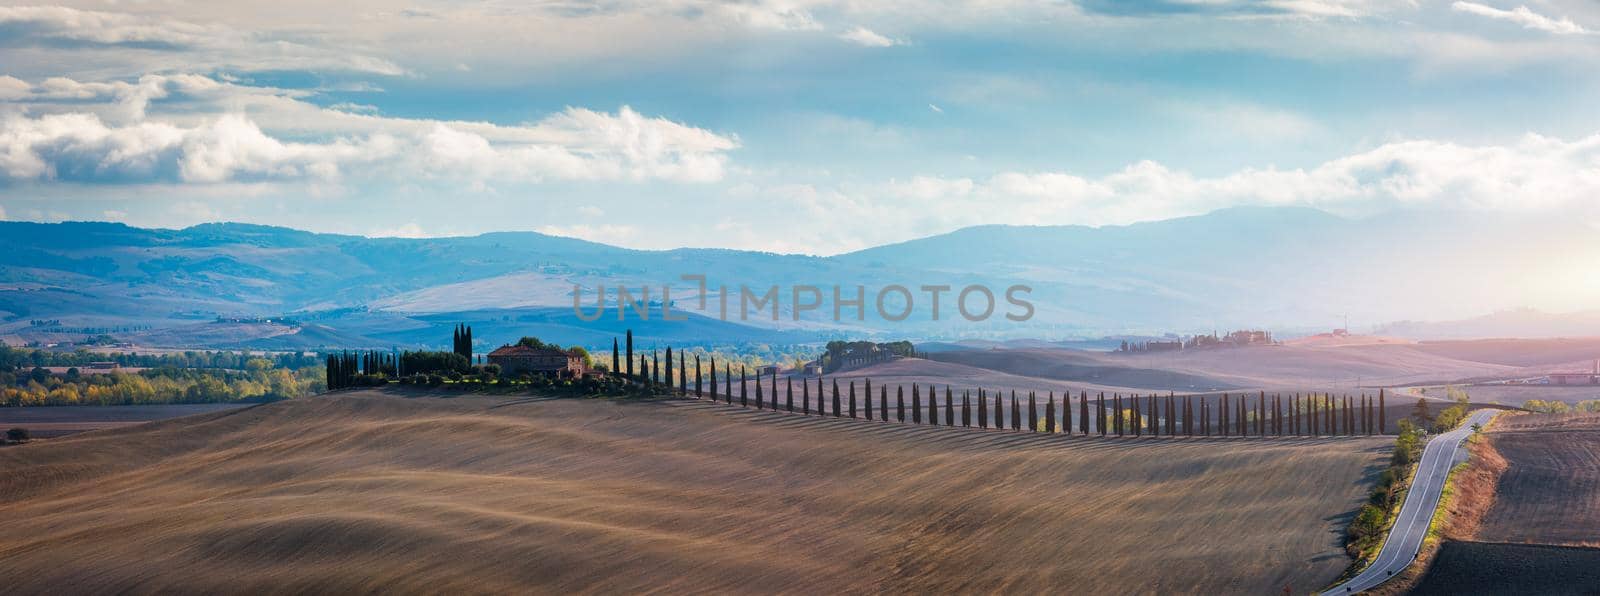 Well known Tuscany landscape with grain fields, cypress trees and houses on the hills at sunset. Summer rural landscape with curved road in Tuscany, Italy, Europe